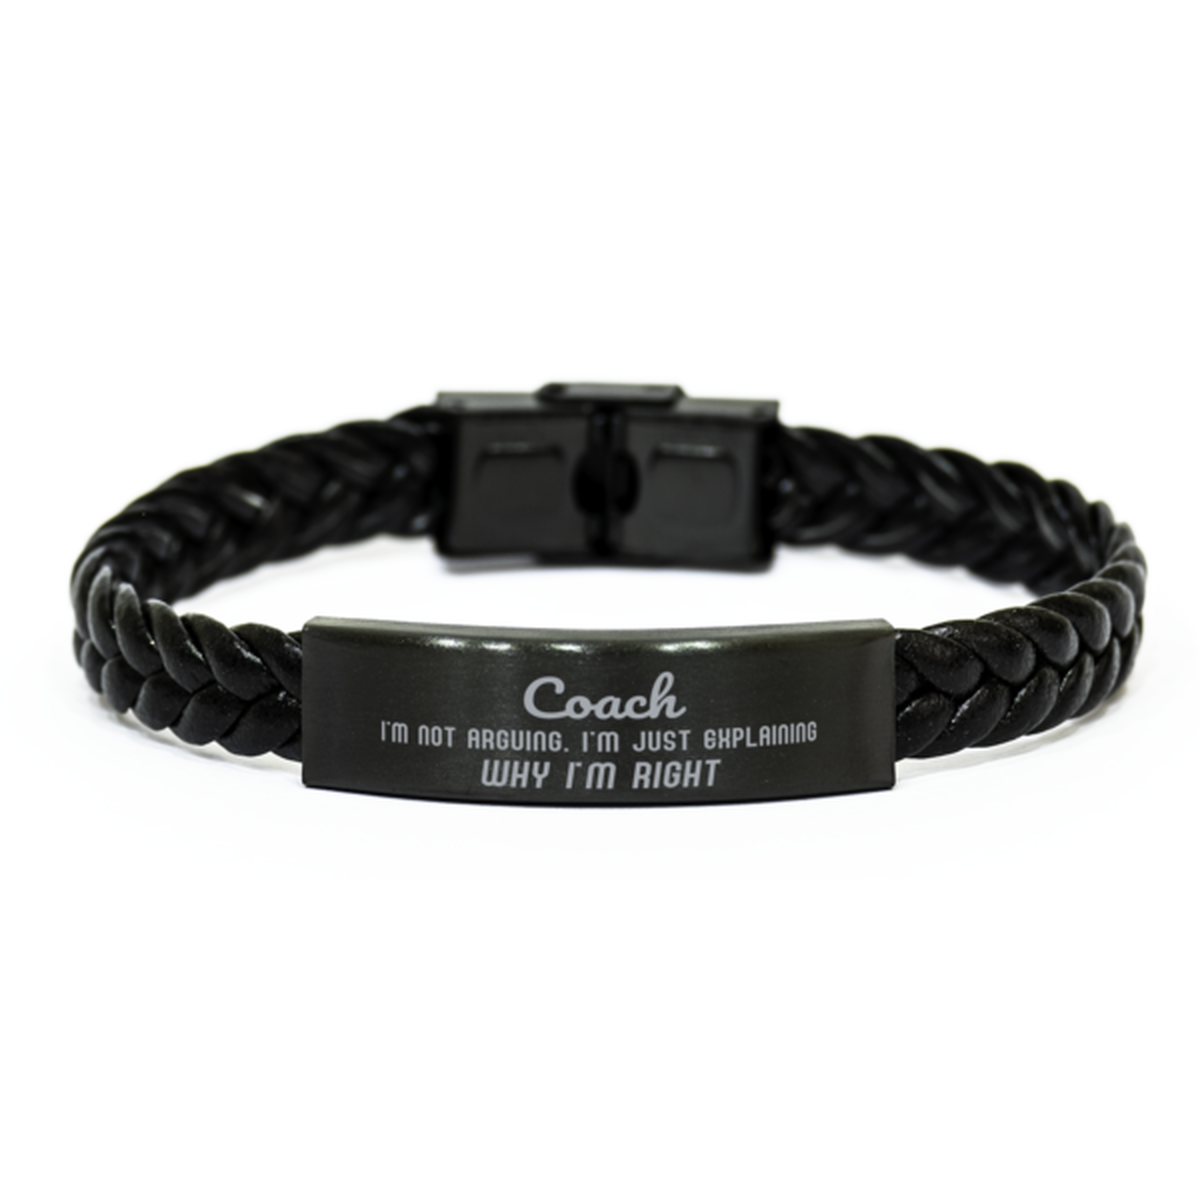 Coach I'm not Arguing. I'm Just Explaining Why I'm RIGHT Braided Leather Bracelet, Graduation Birthday Christmas Coach Gifts For Coach Funny Saying Quote Present for Men Women Coworker